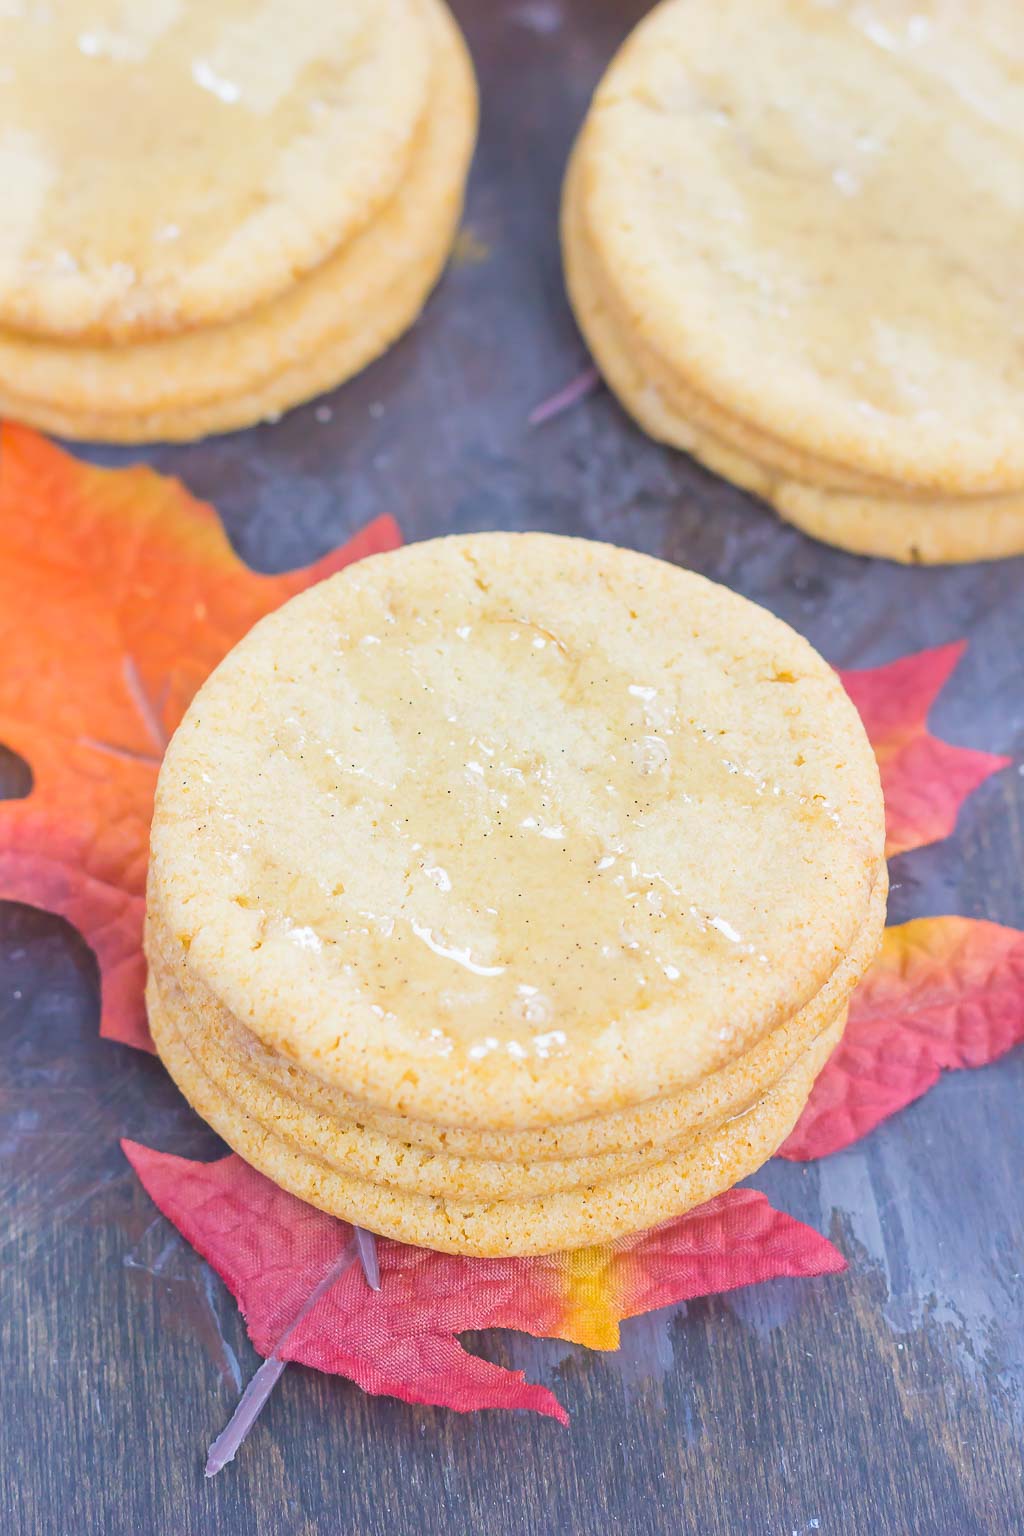 These Soft Maple Sugar Cookies make a delicious fall treat. Packed with a buttery taste and a hint of pure maple syrup, these soft and chewy cookies will quickly become a new favorite!